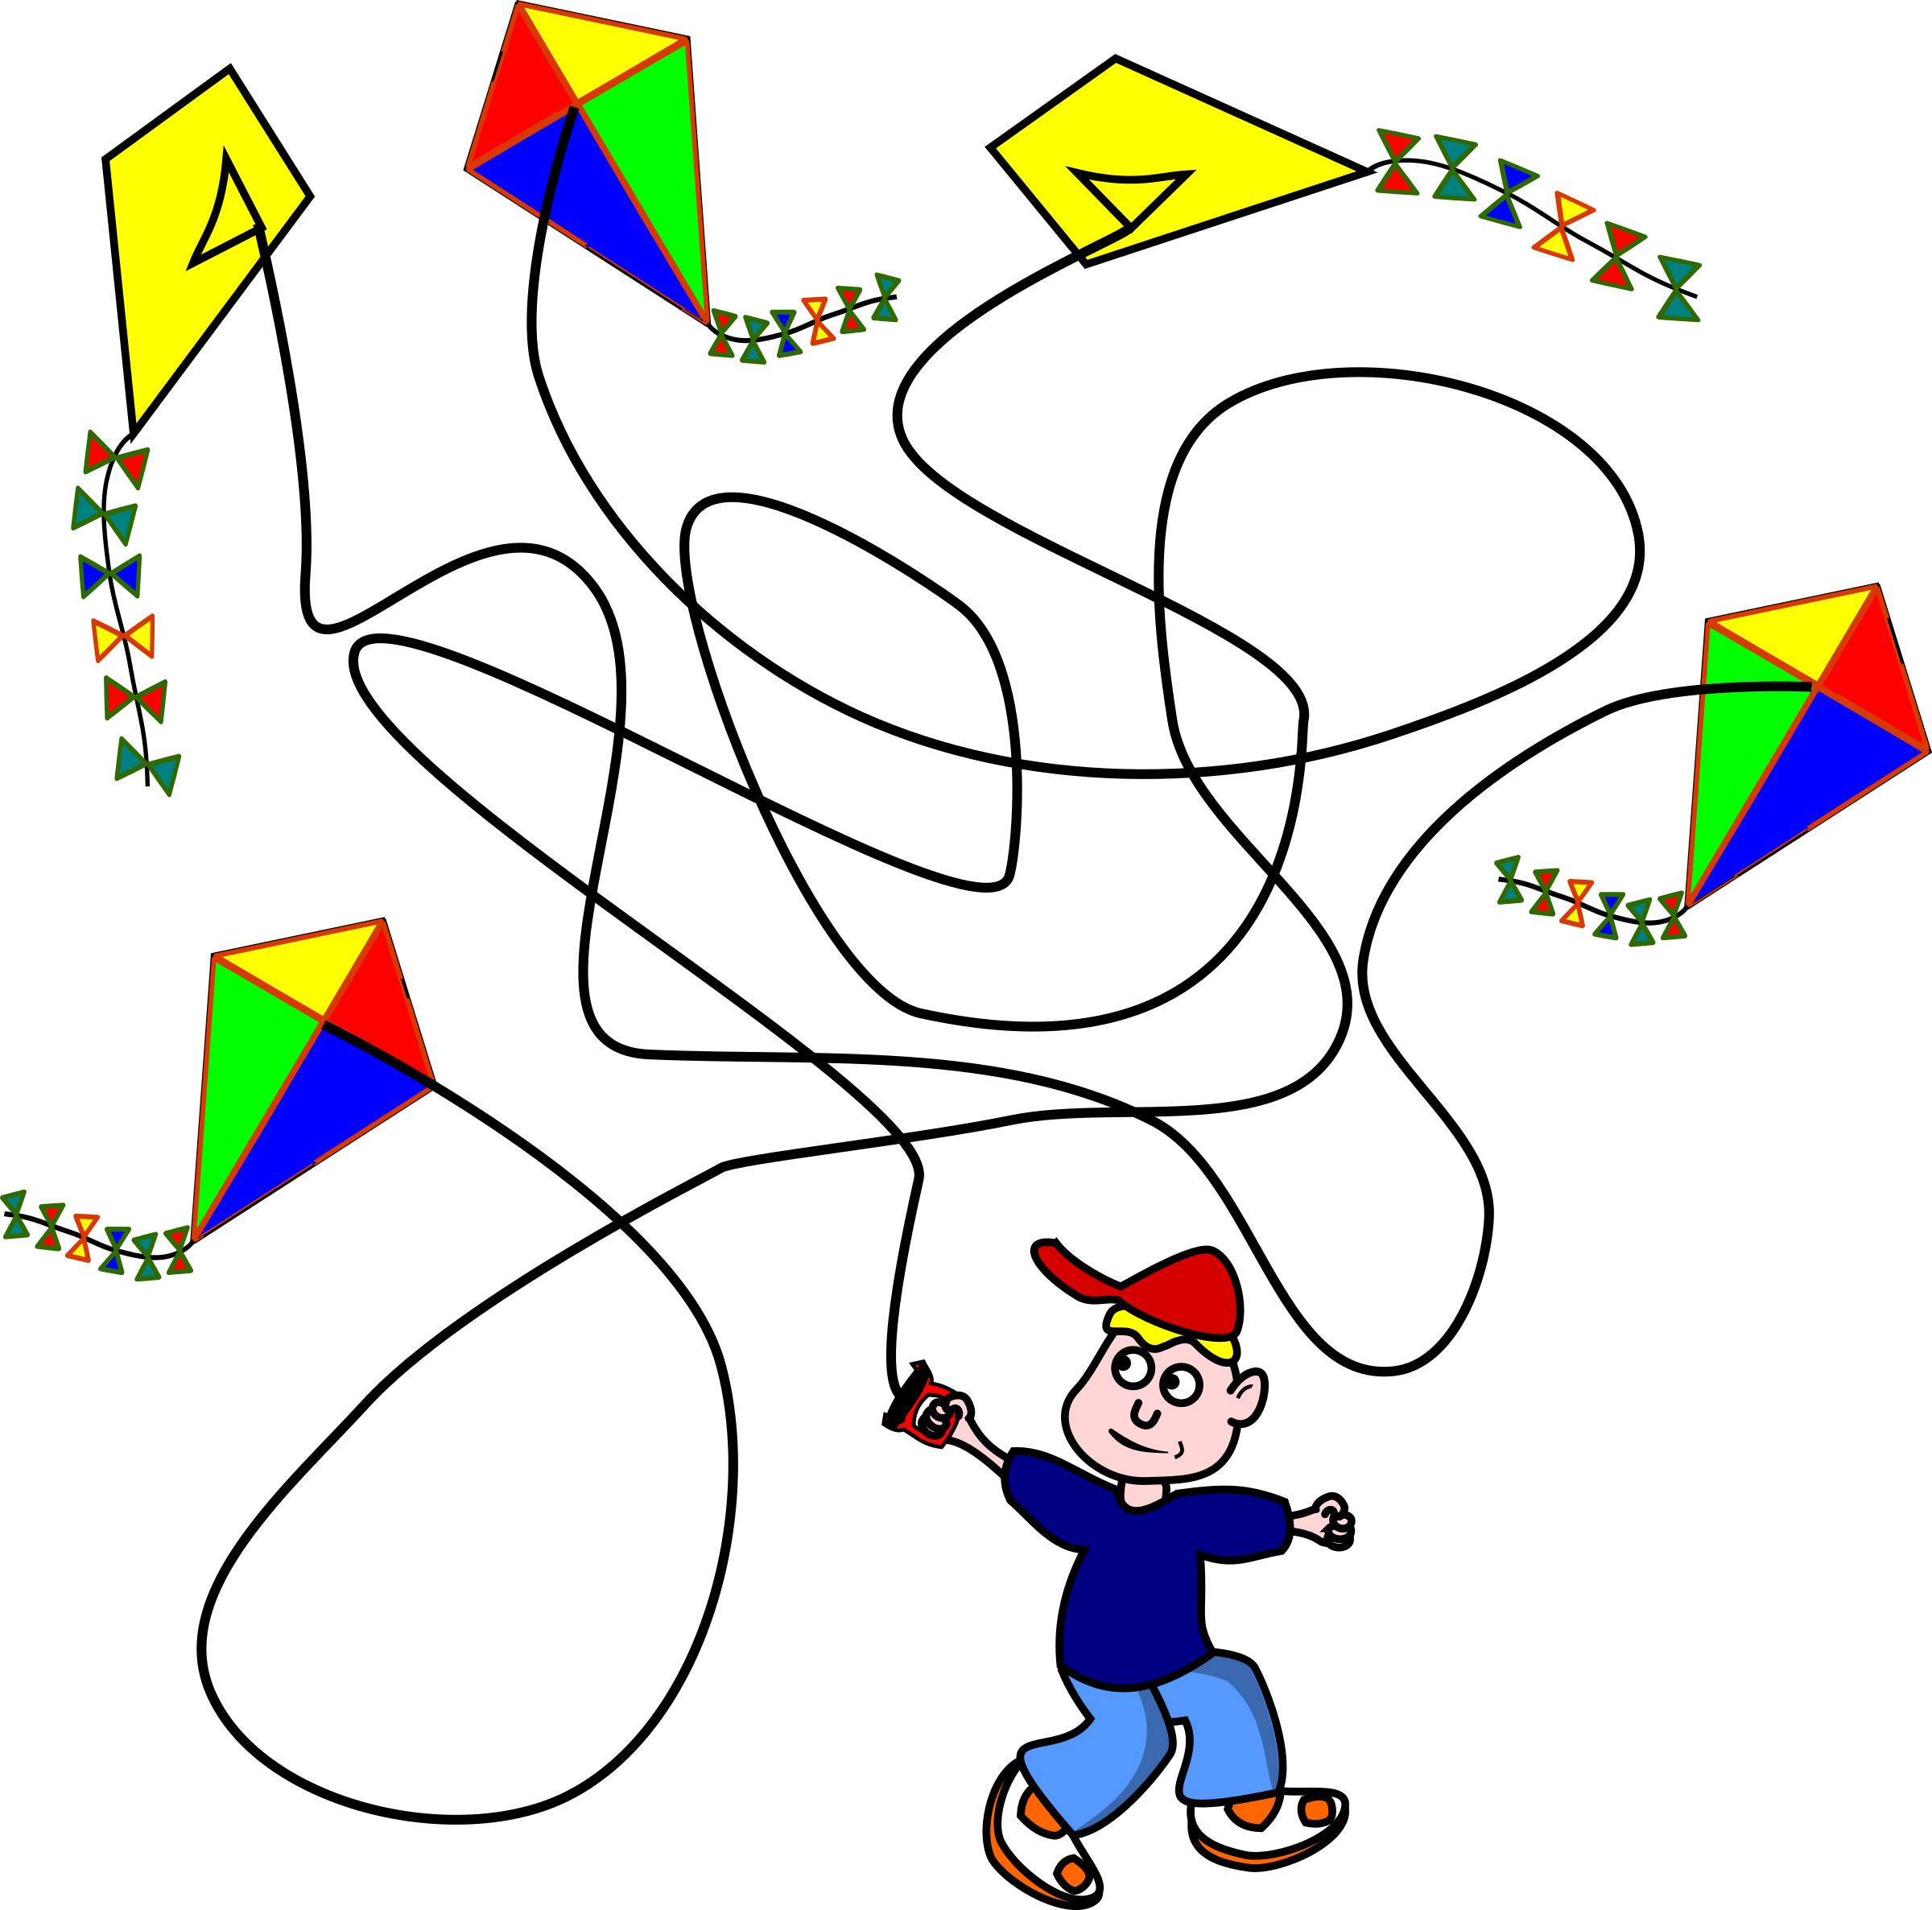 Find Toms kite - colored png